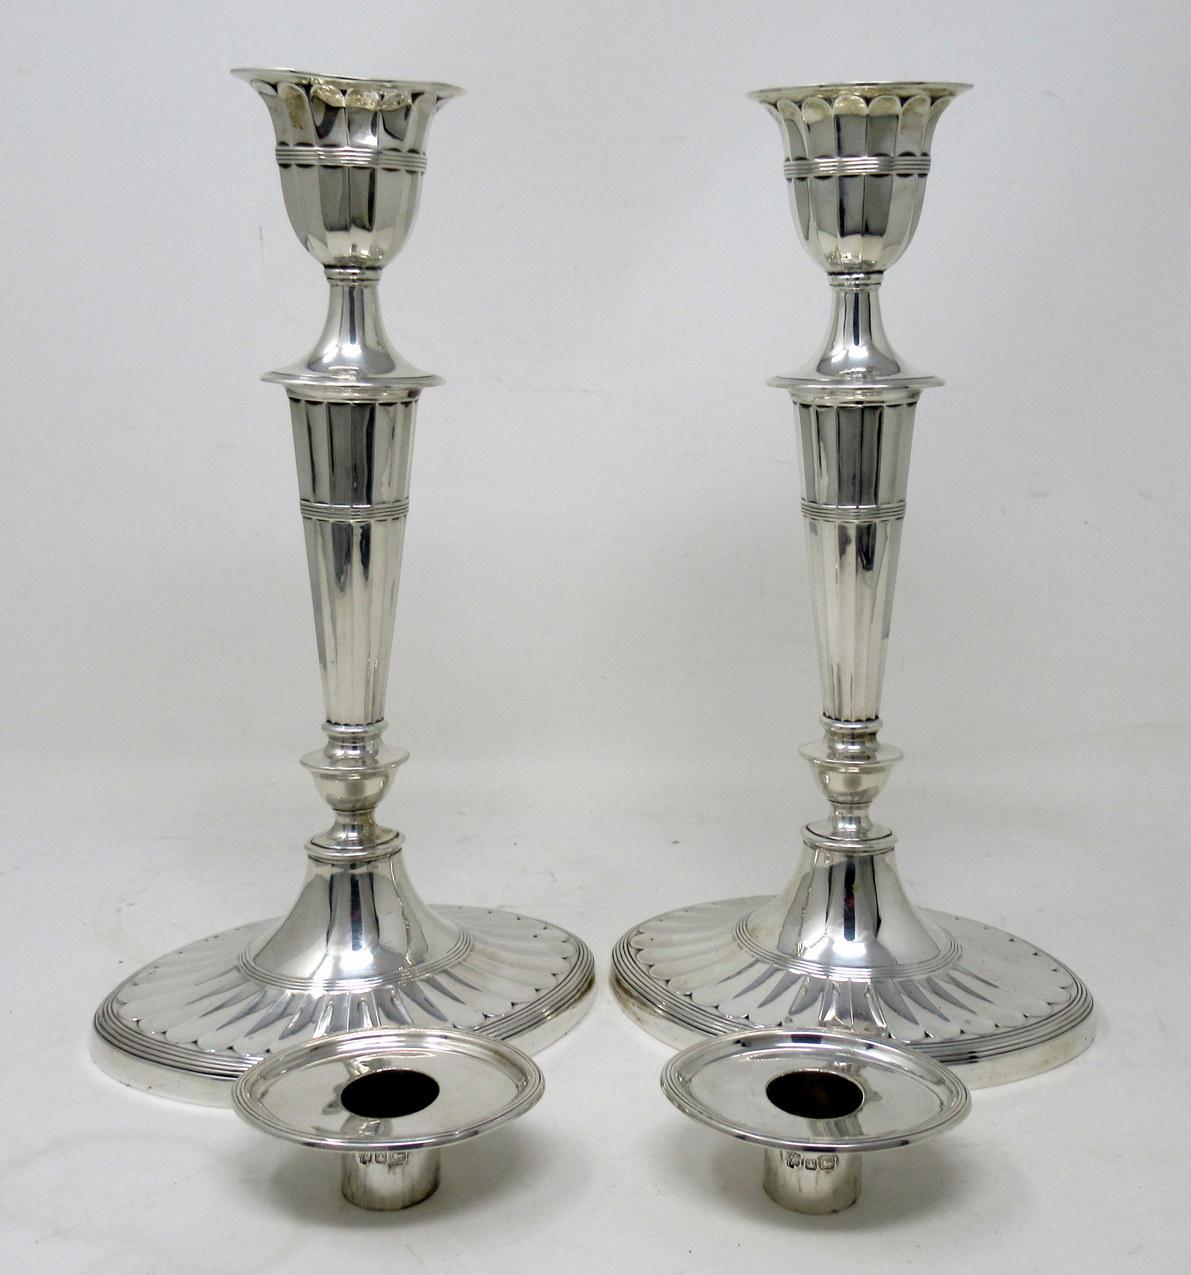 Cast Antique Pair English Sterling Silver Candlesticks Candelabra Adams Style 1896